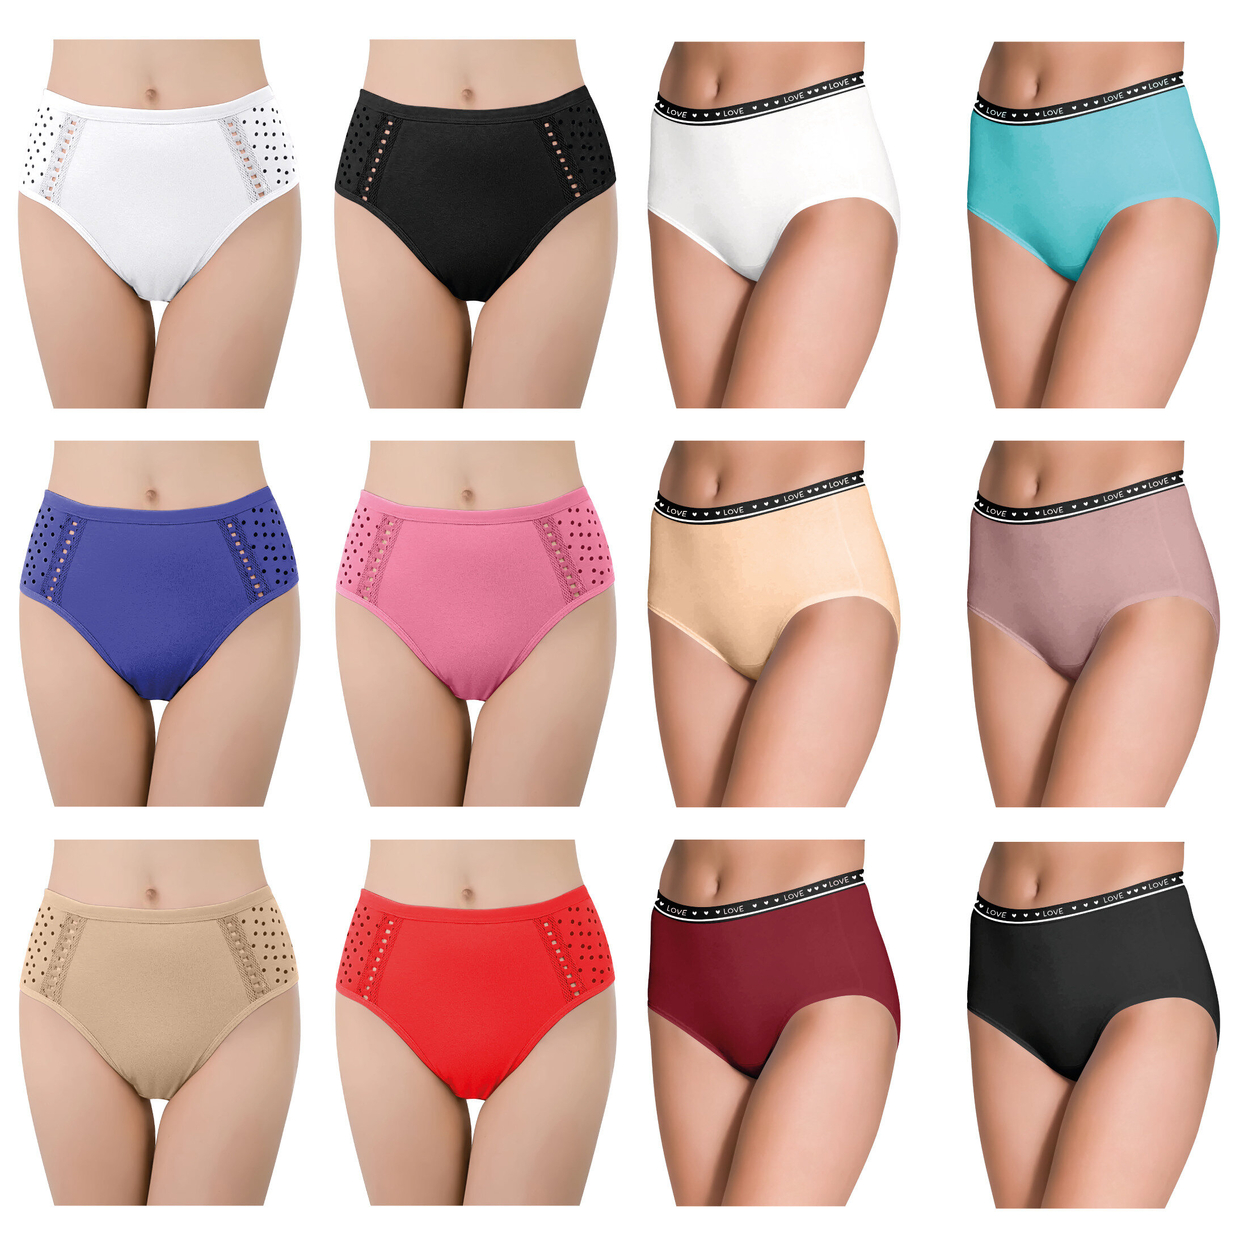 Multi-Pack: Women's Ultra Soft Moisture Wicking Panties Cotton Perfect Fit Underwear (Plus Sizes Available) - 6-Pack, Small